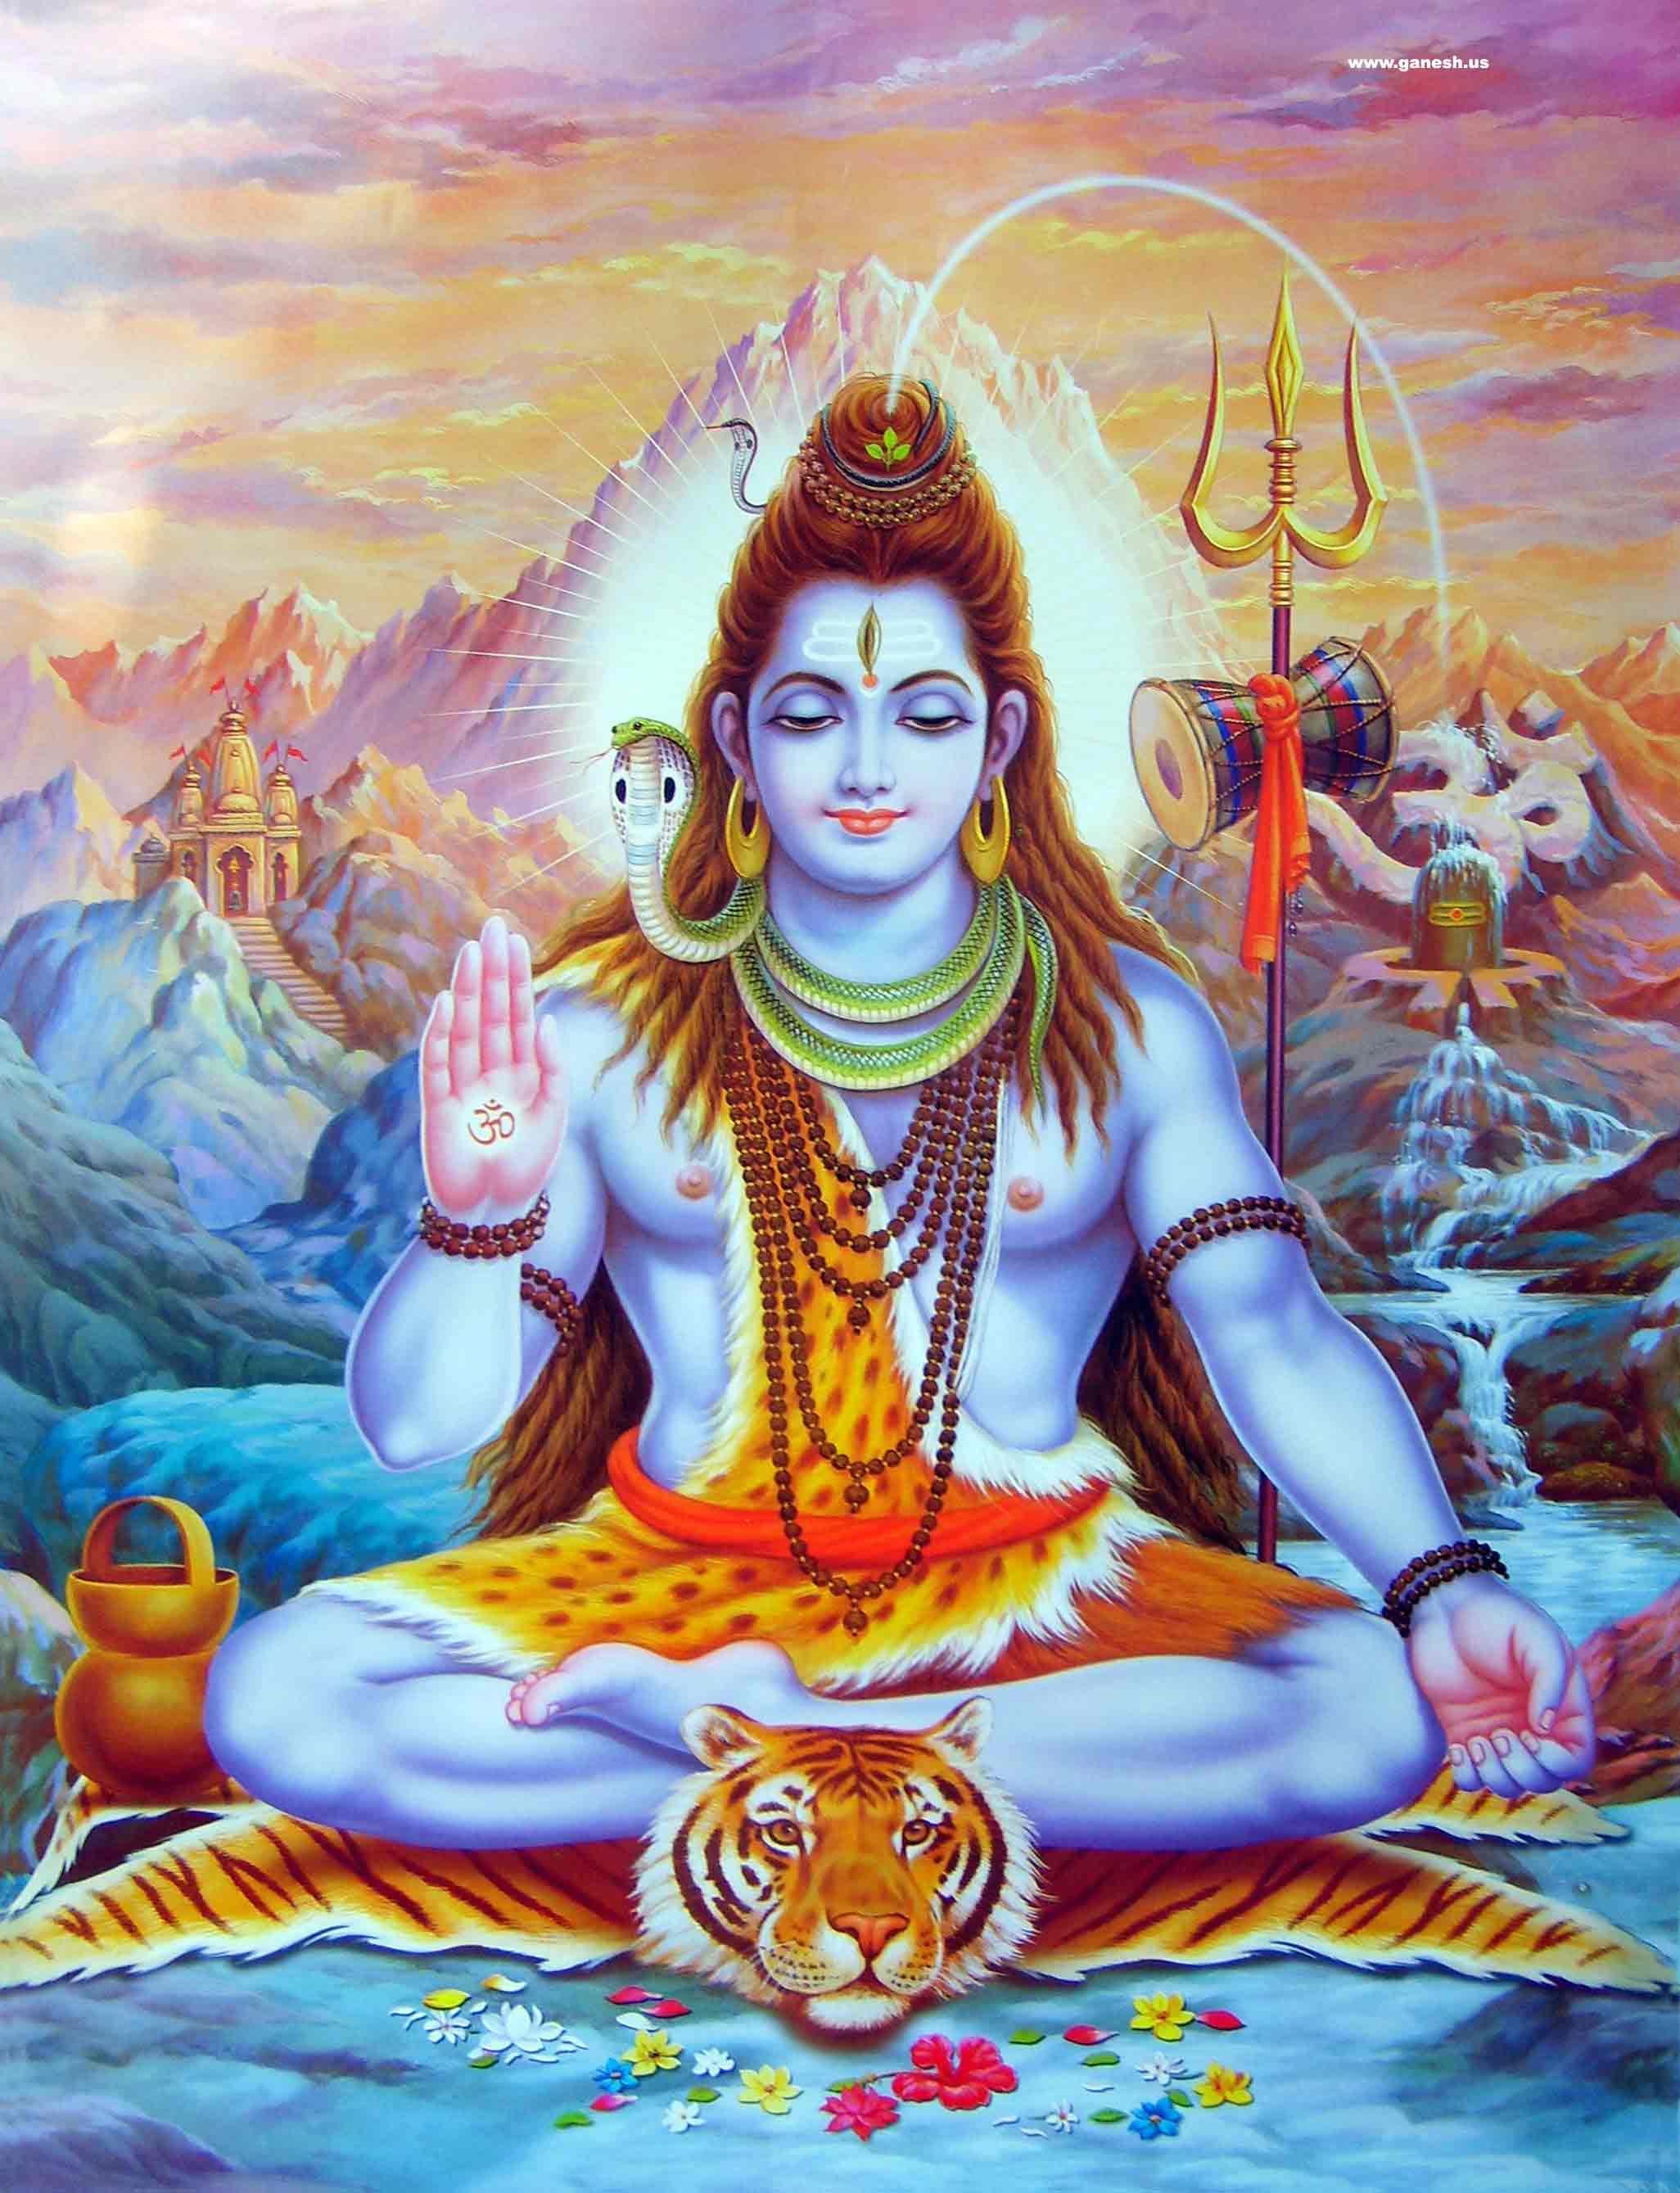 Wallpapers of Lord Shiva.